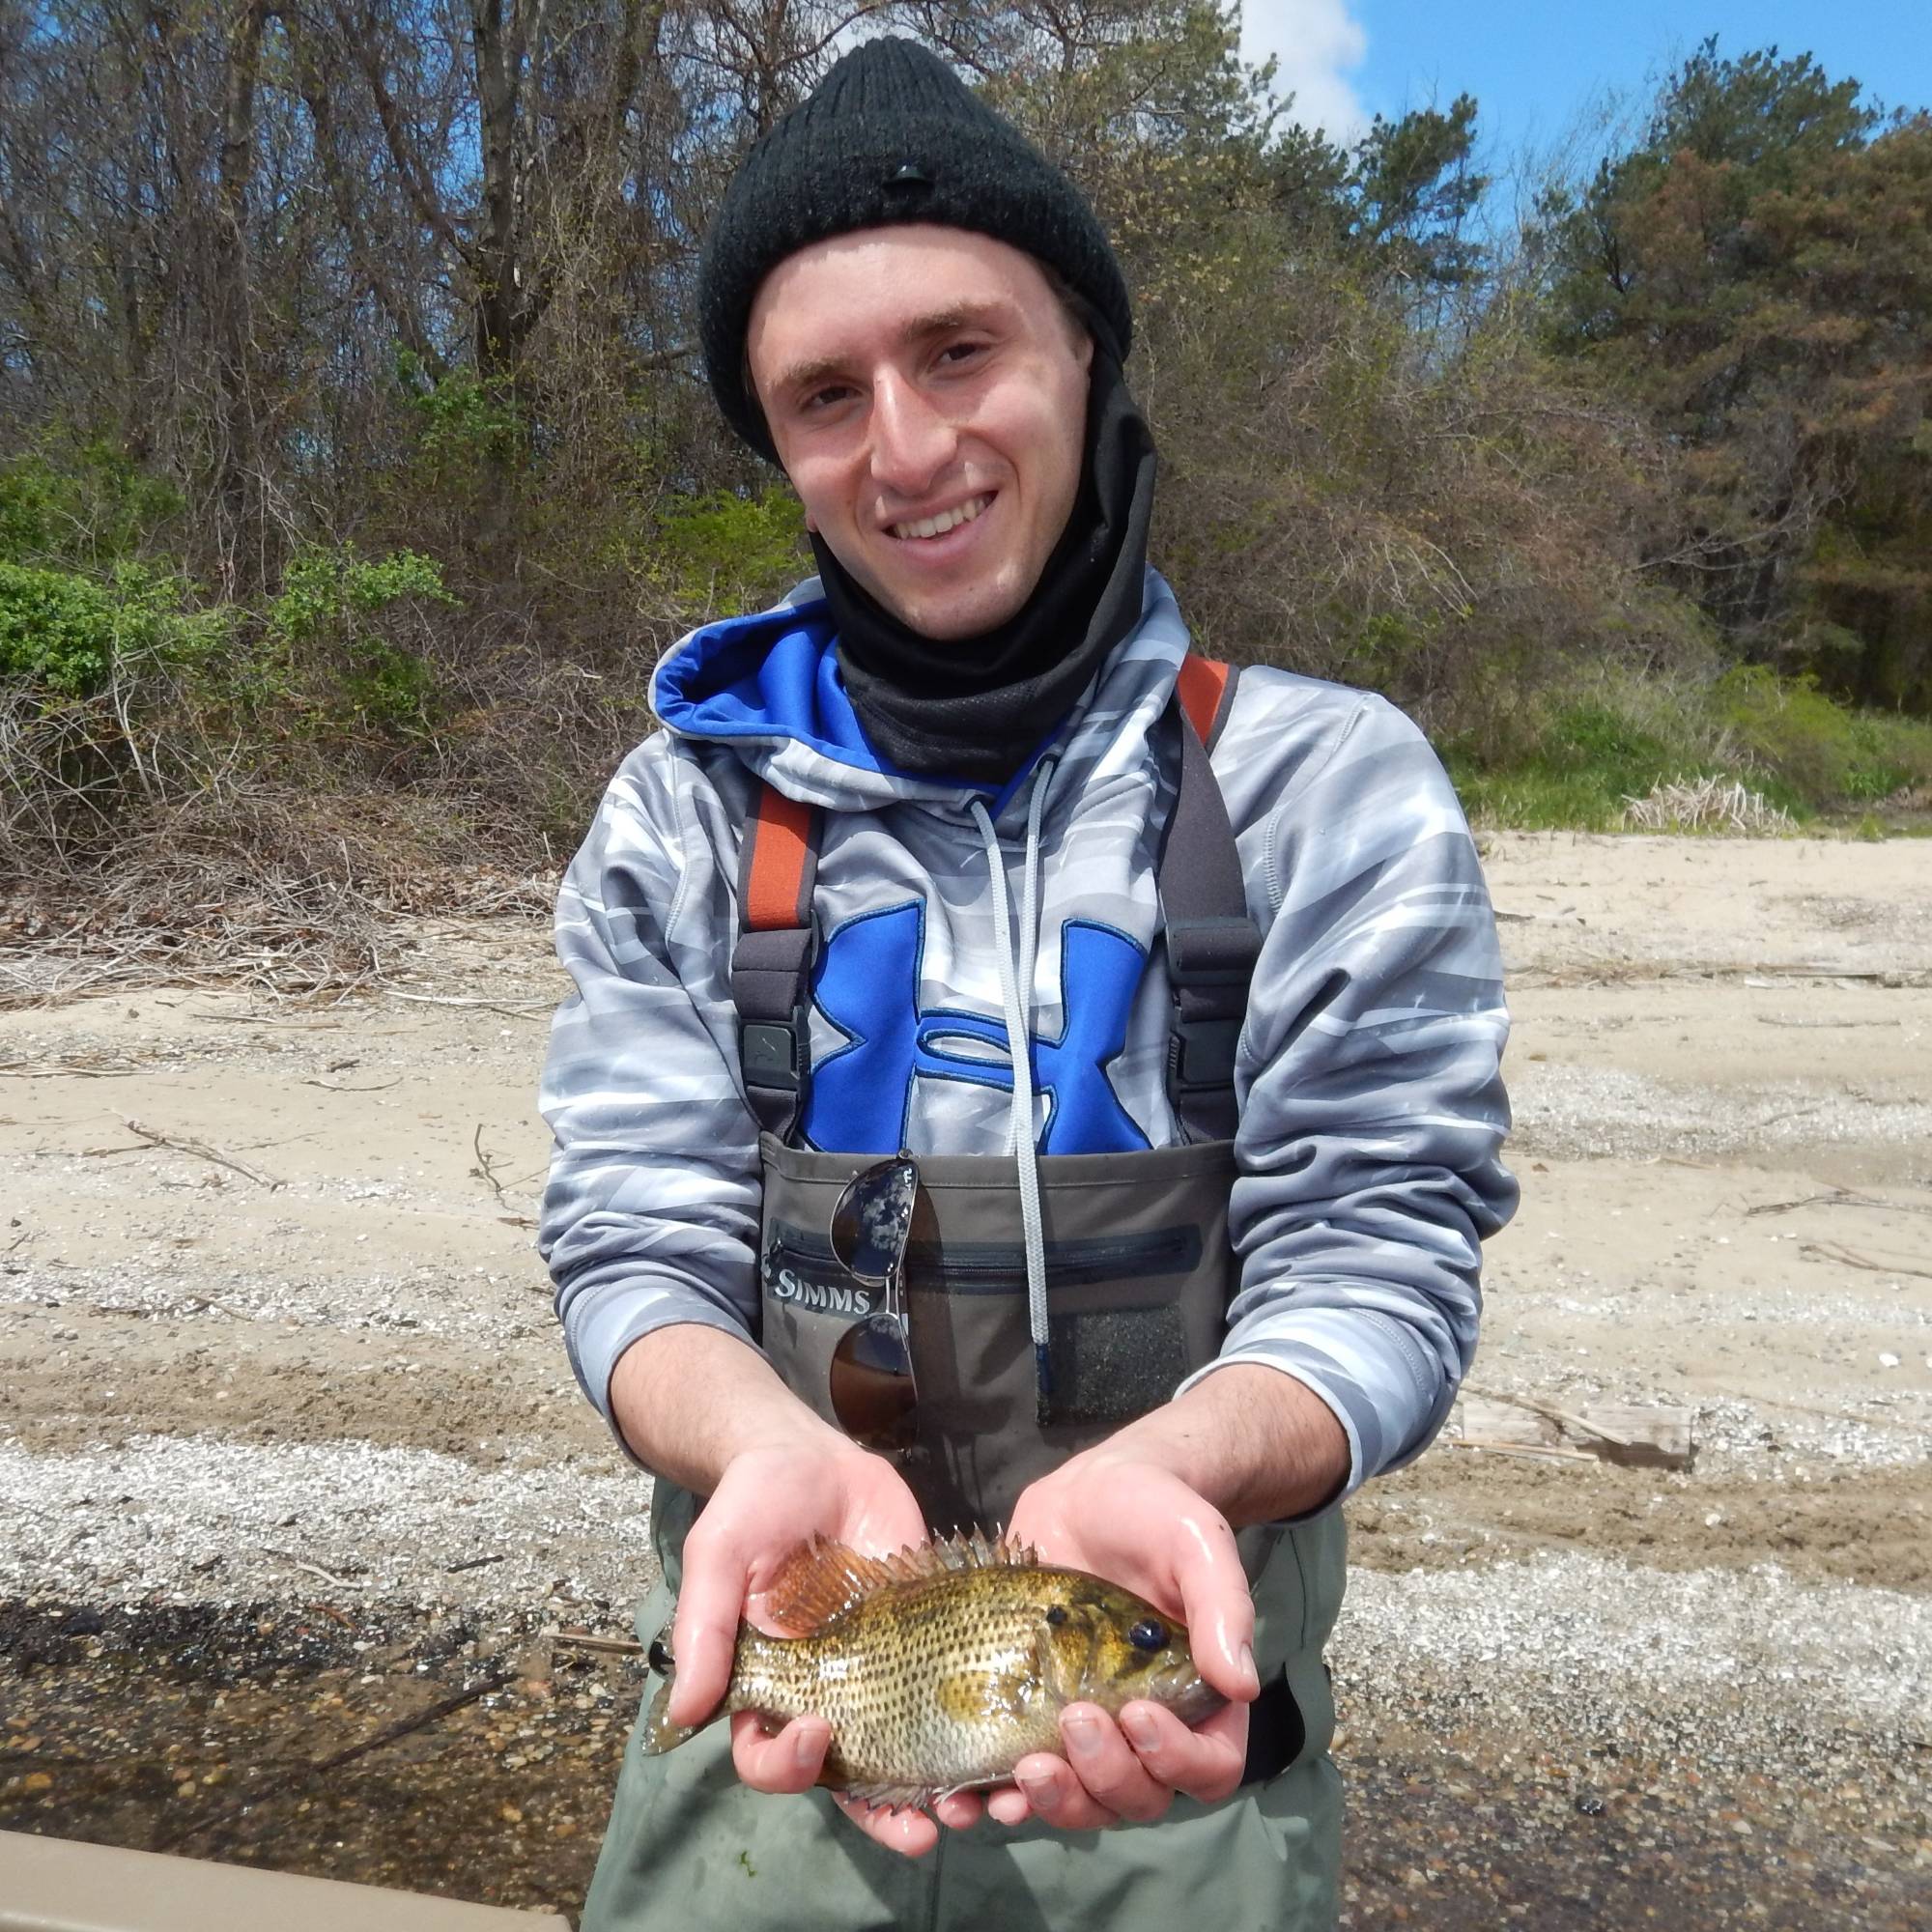 A student is holding a rock bass (fish) that was captured using a fyke net.